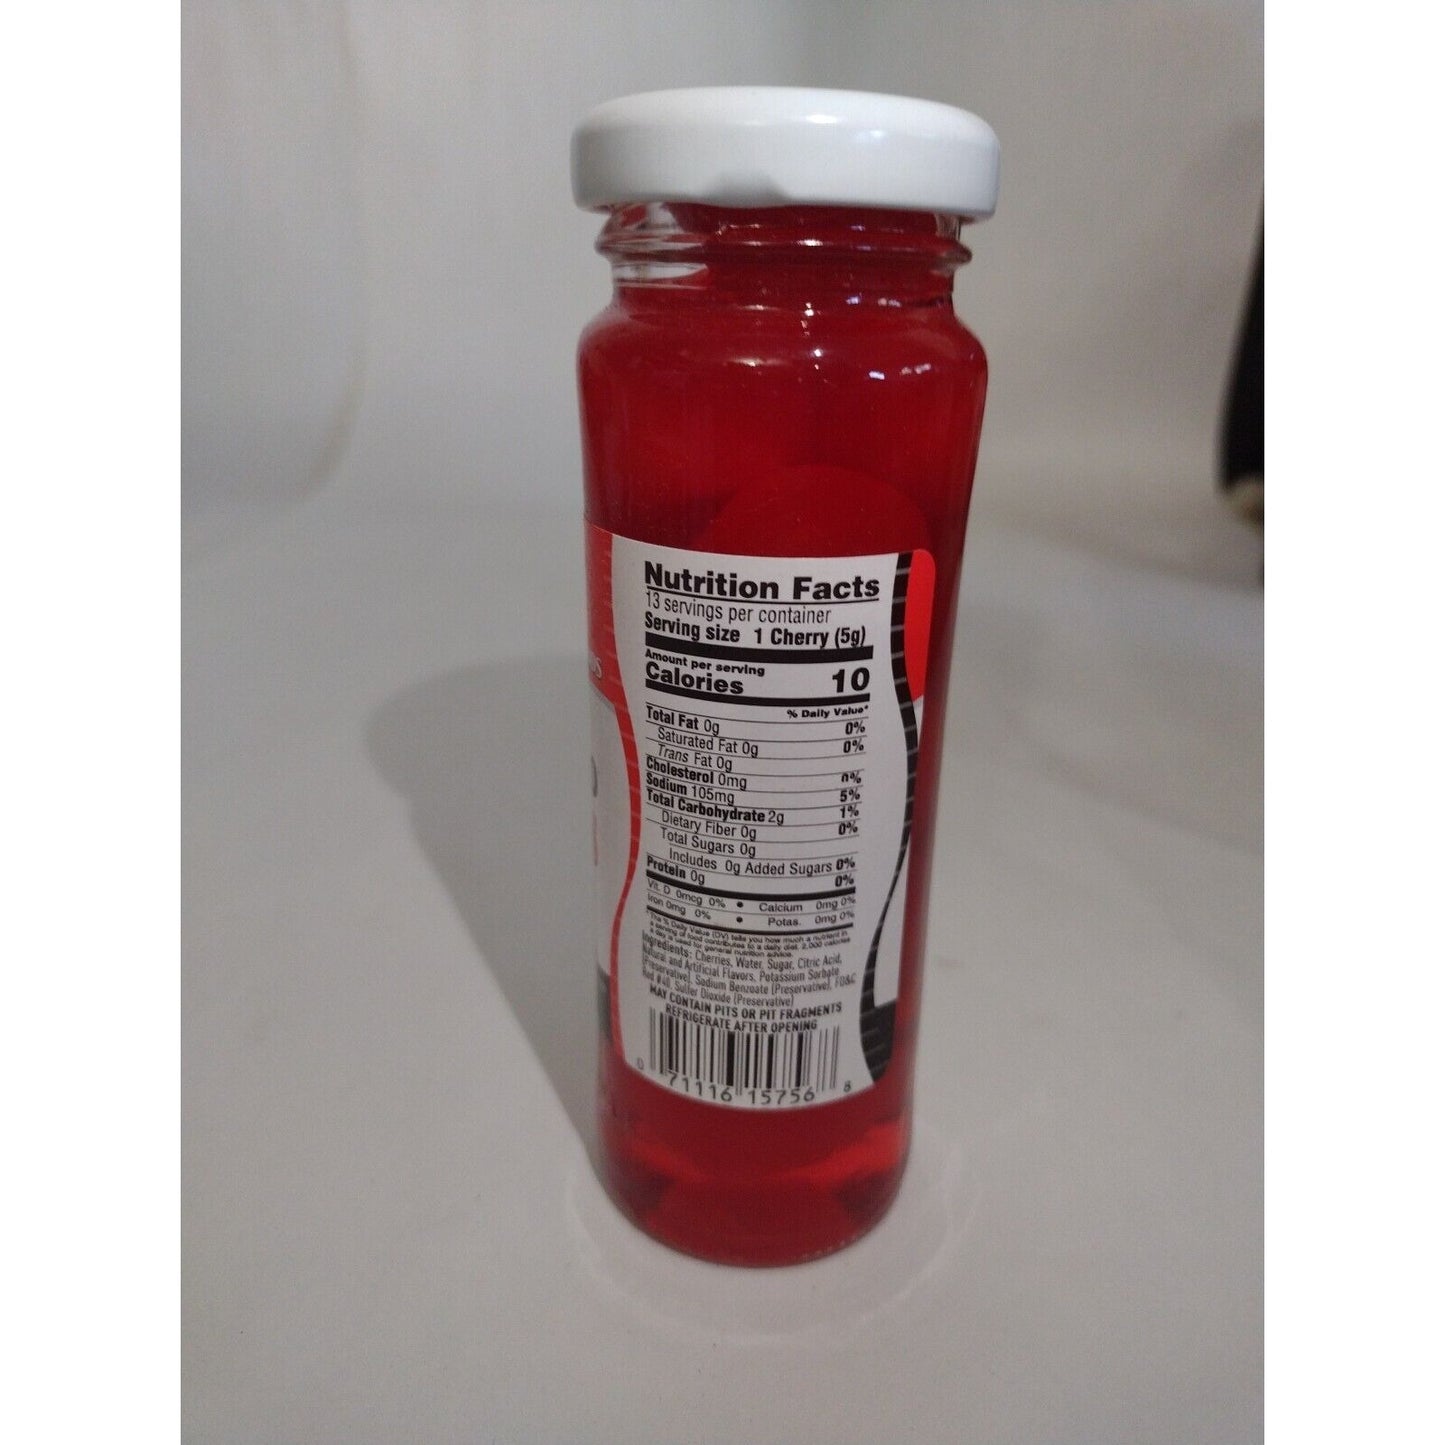 Spec's Maraschino Cherries Without Stems 4 Ounce Glass Bottle